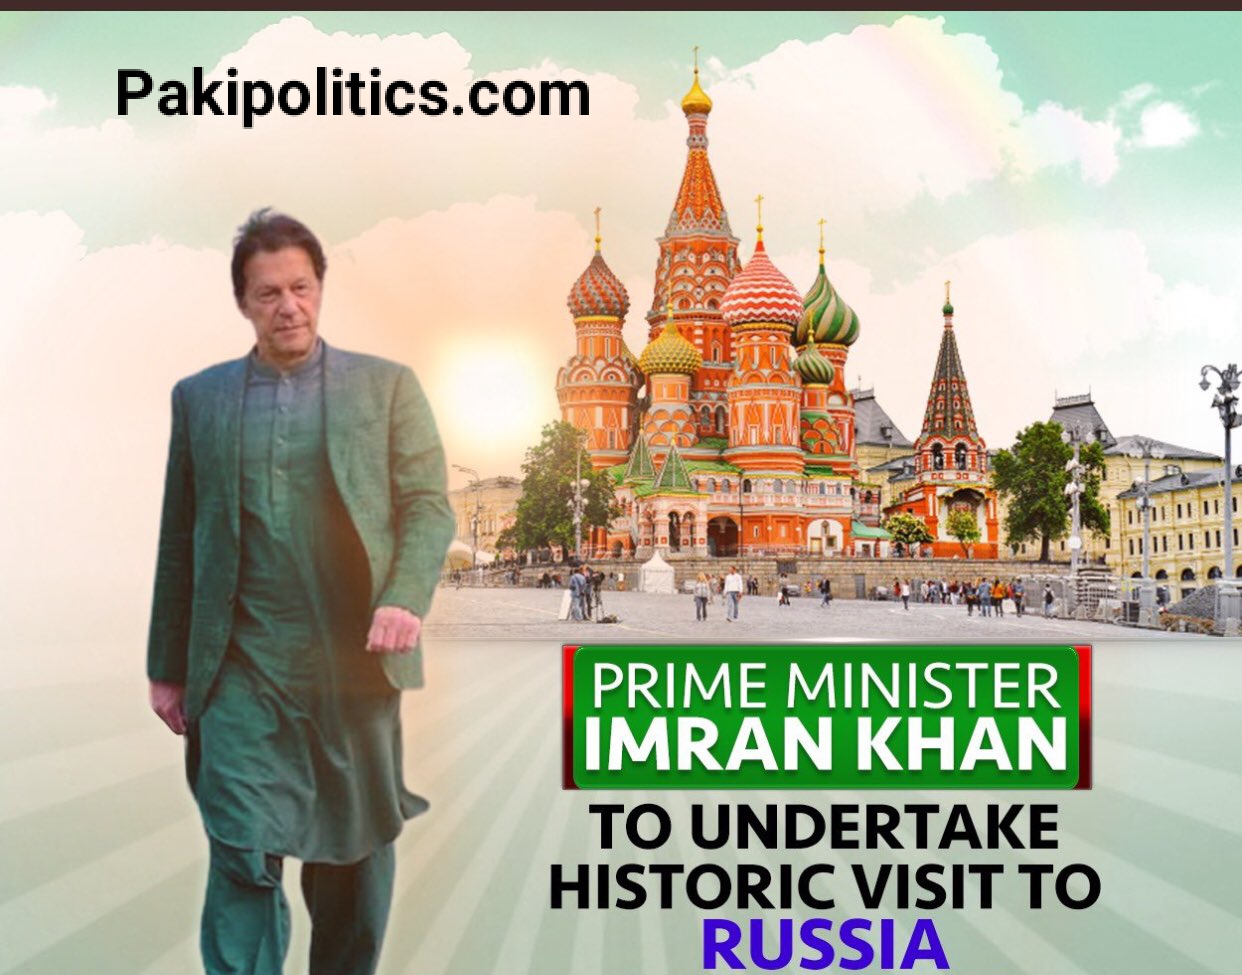 Prime Minister Imran Khan left for Moscow on his historic two-day visit to RussiaSince.